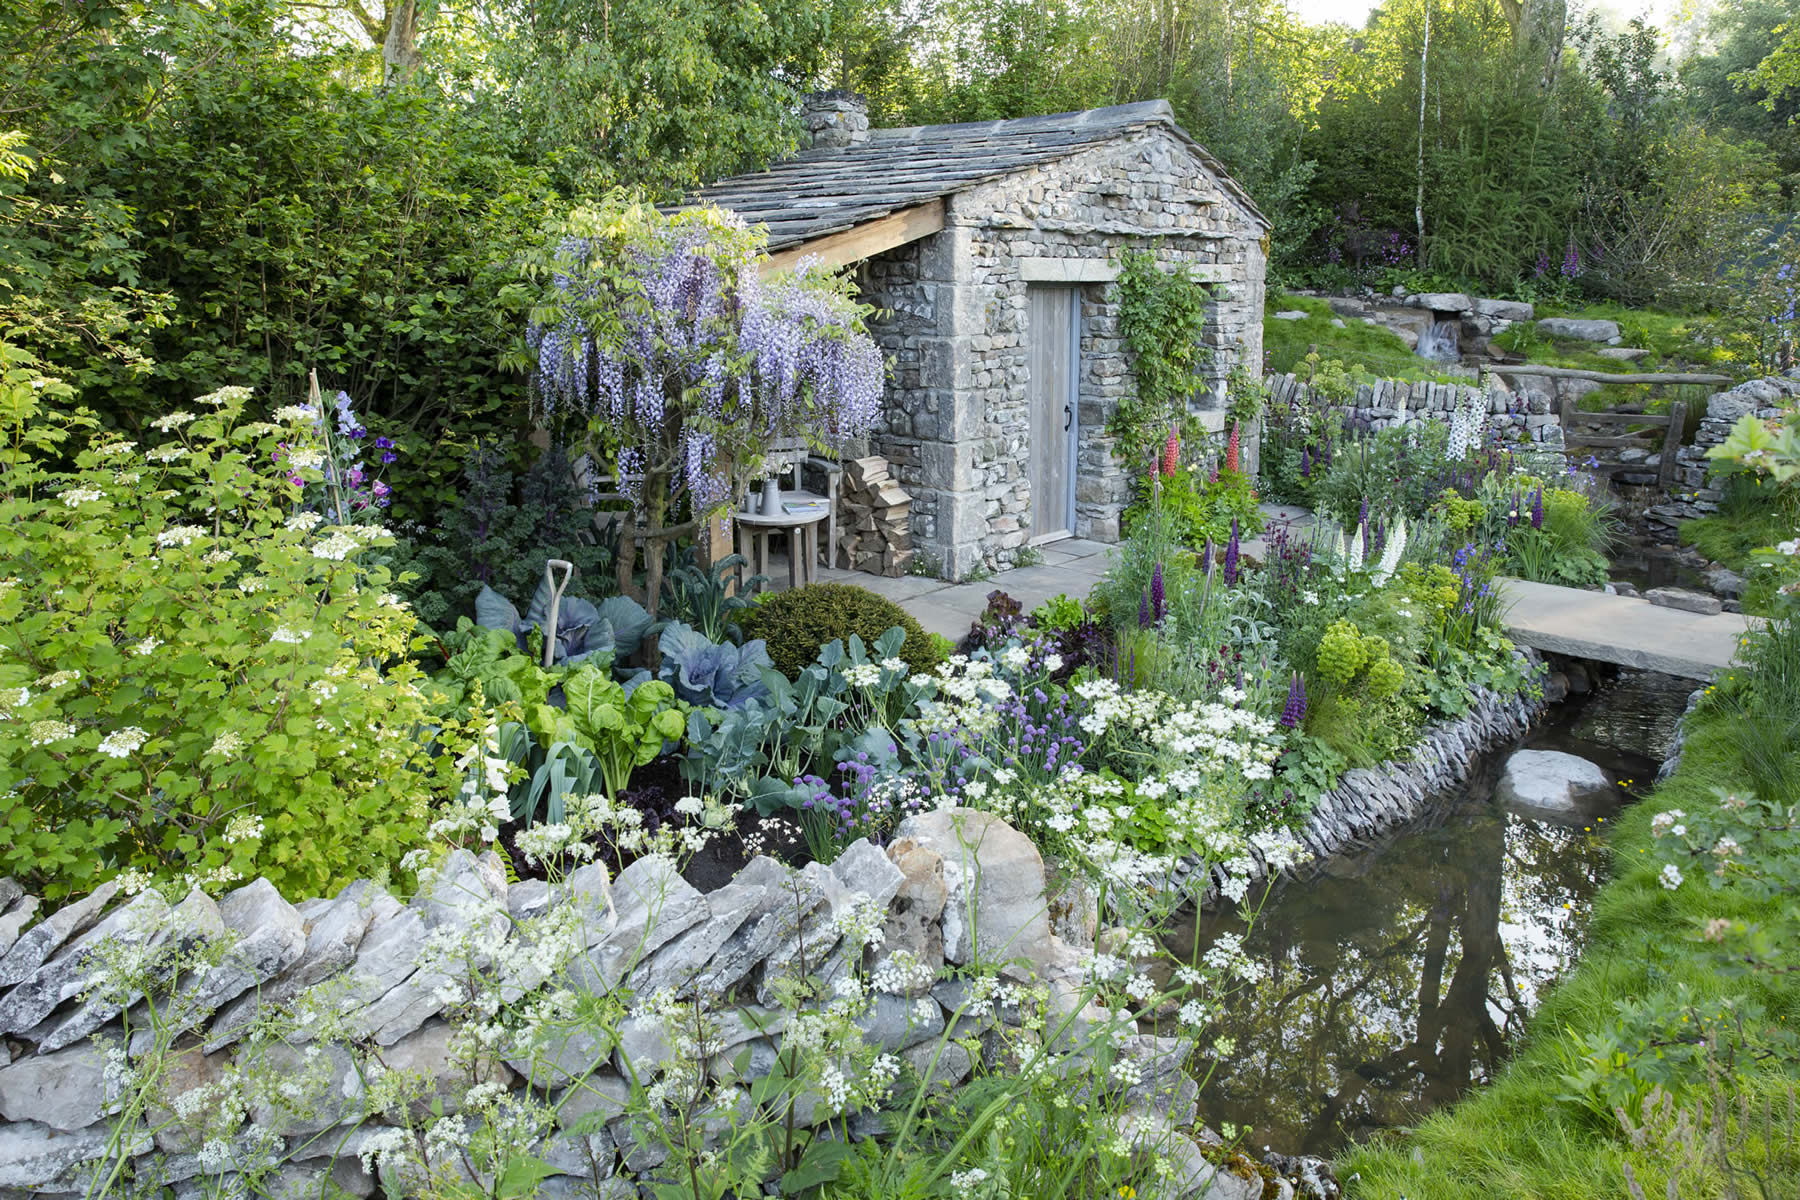 Image name wtylandformchelsea19 the 6 image from the post RHS Chelsea Flower Show - Welcome to Yorkshire Garden 2018 in Yorkshire.com.